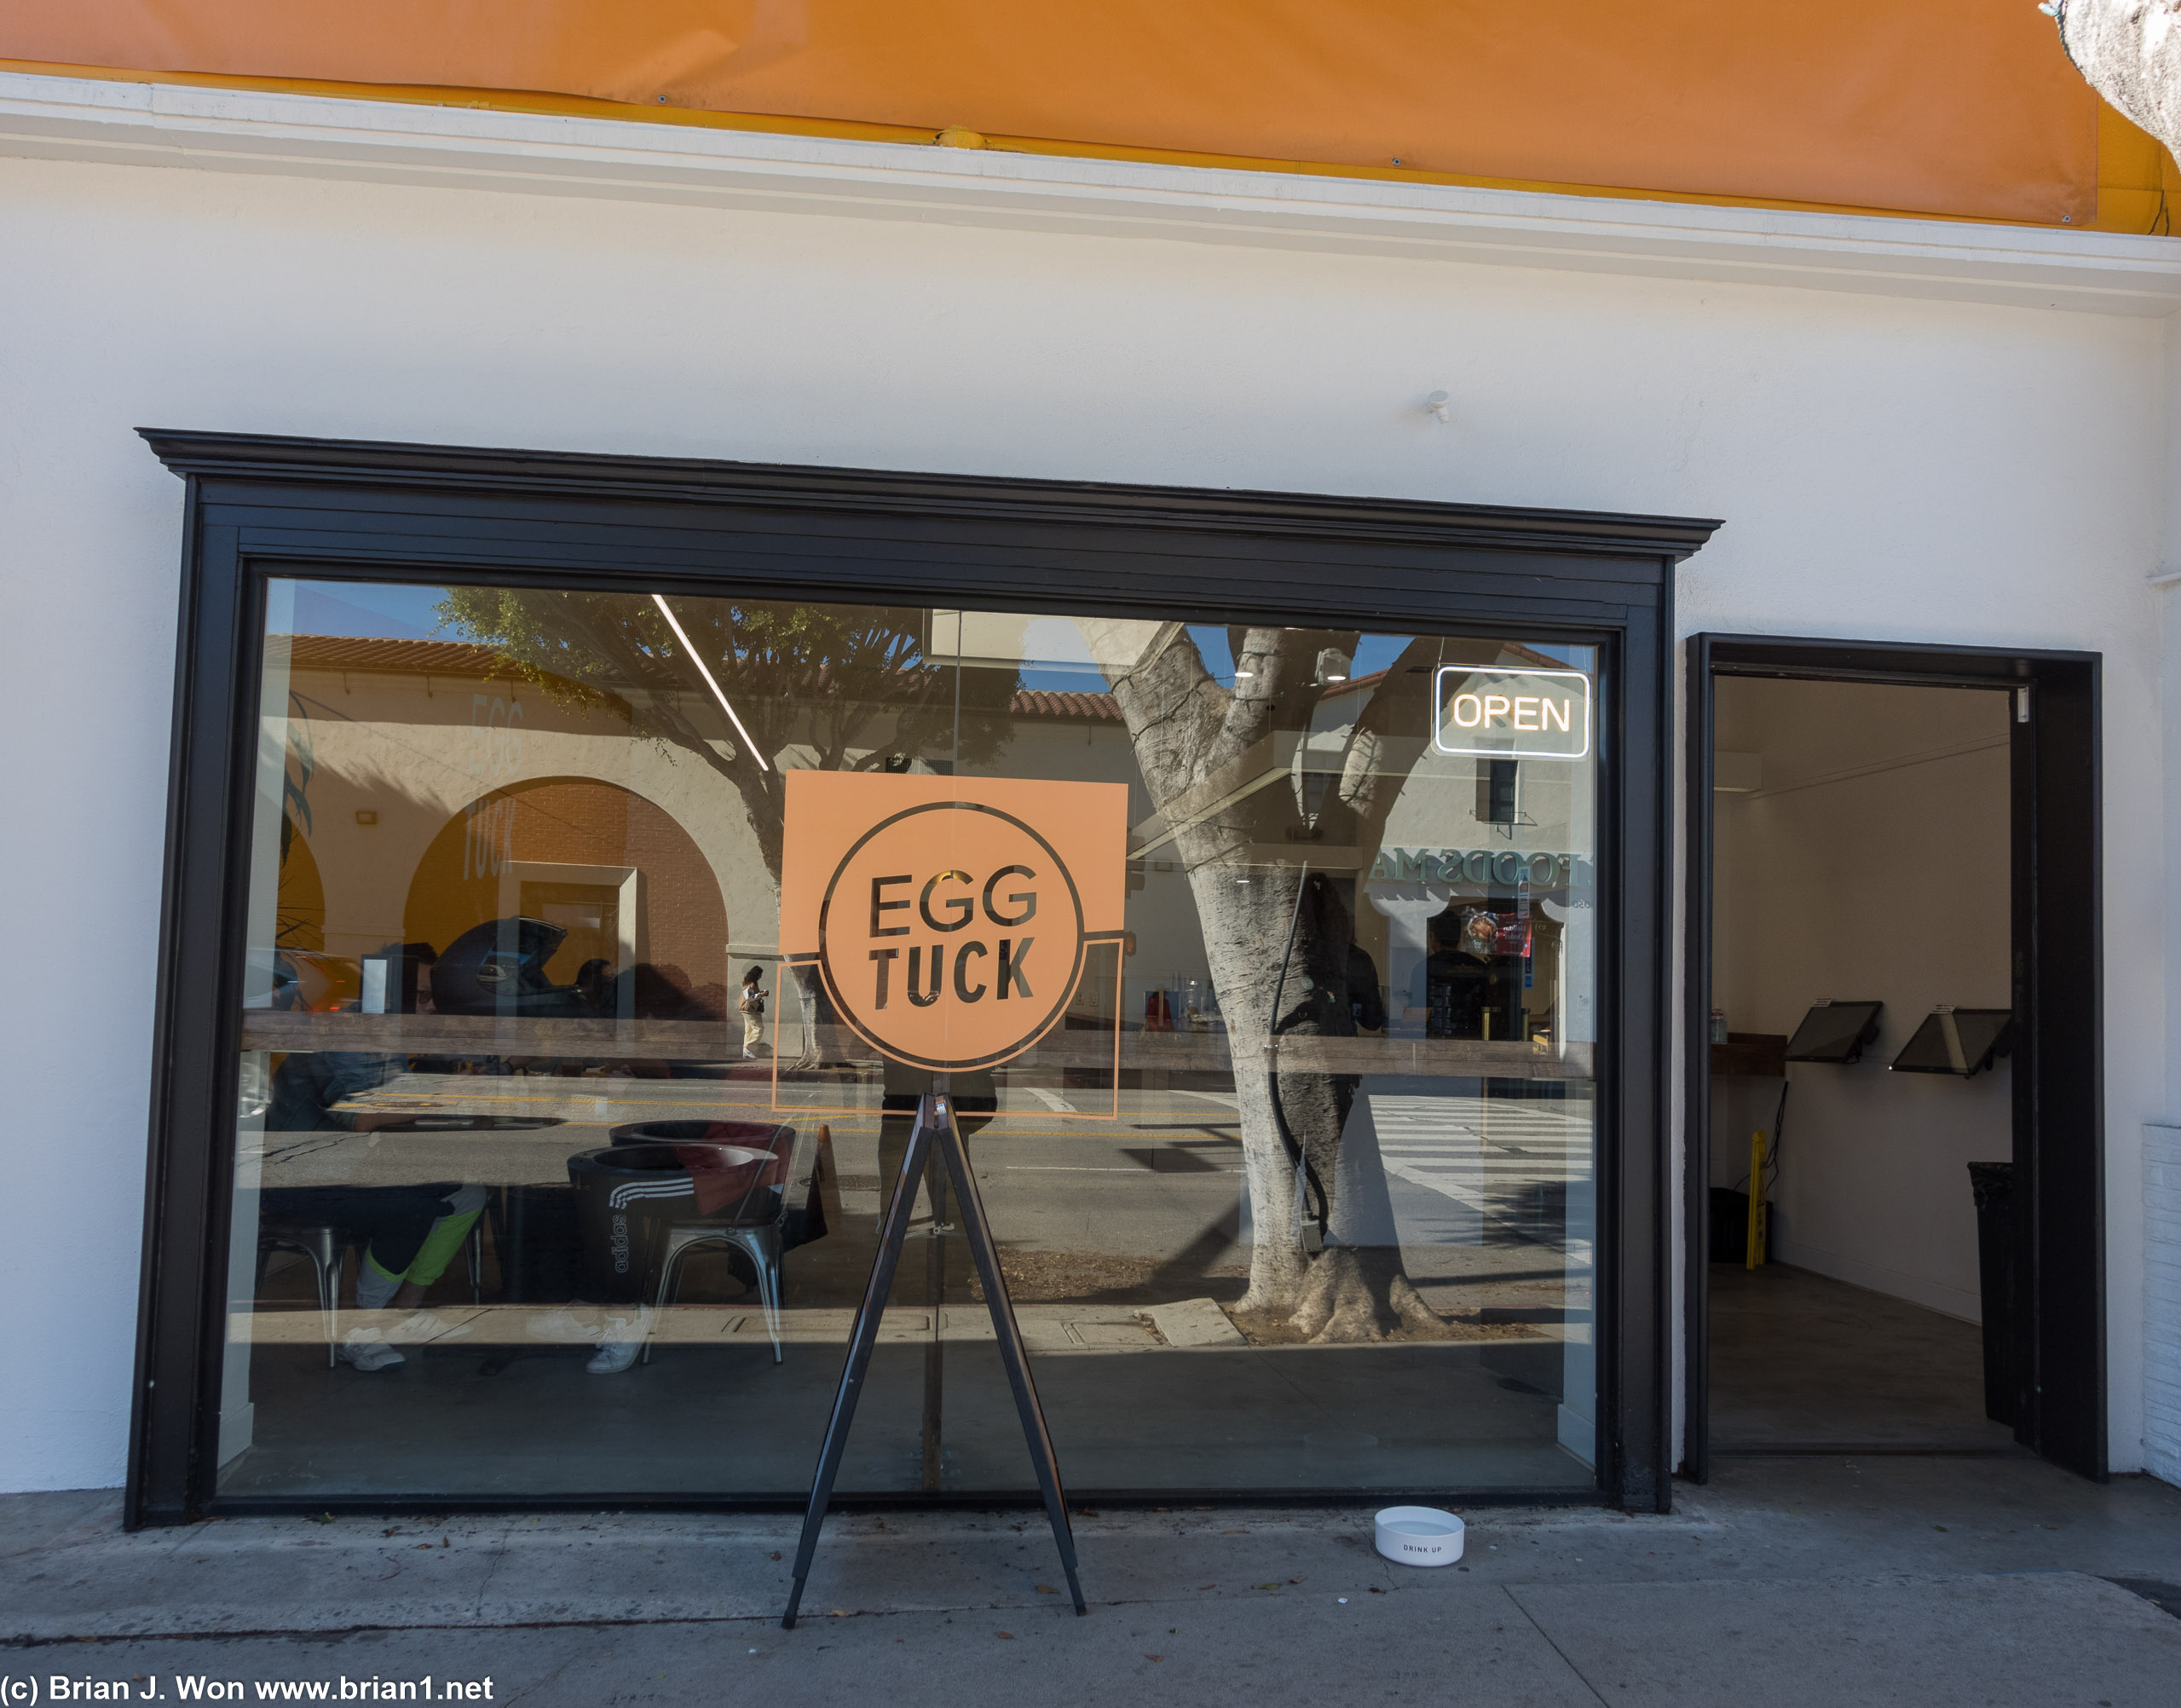 Egg Tuck just opened.